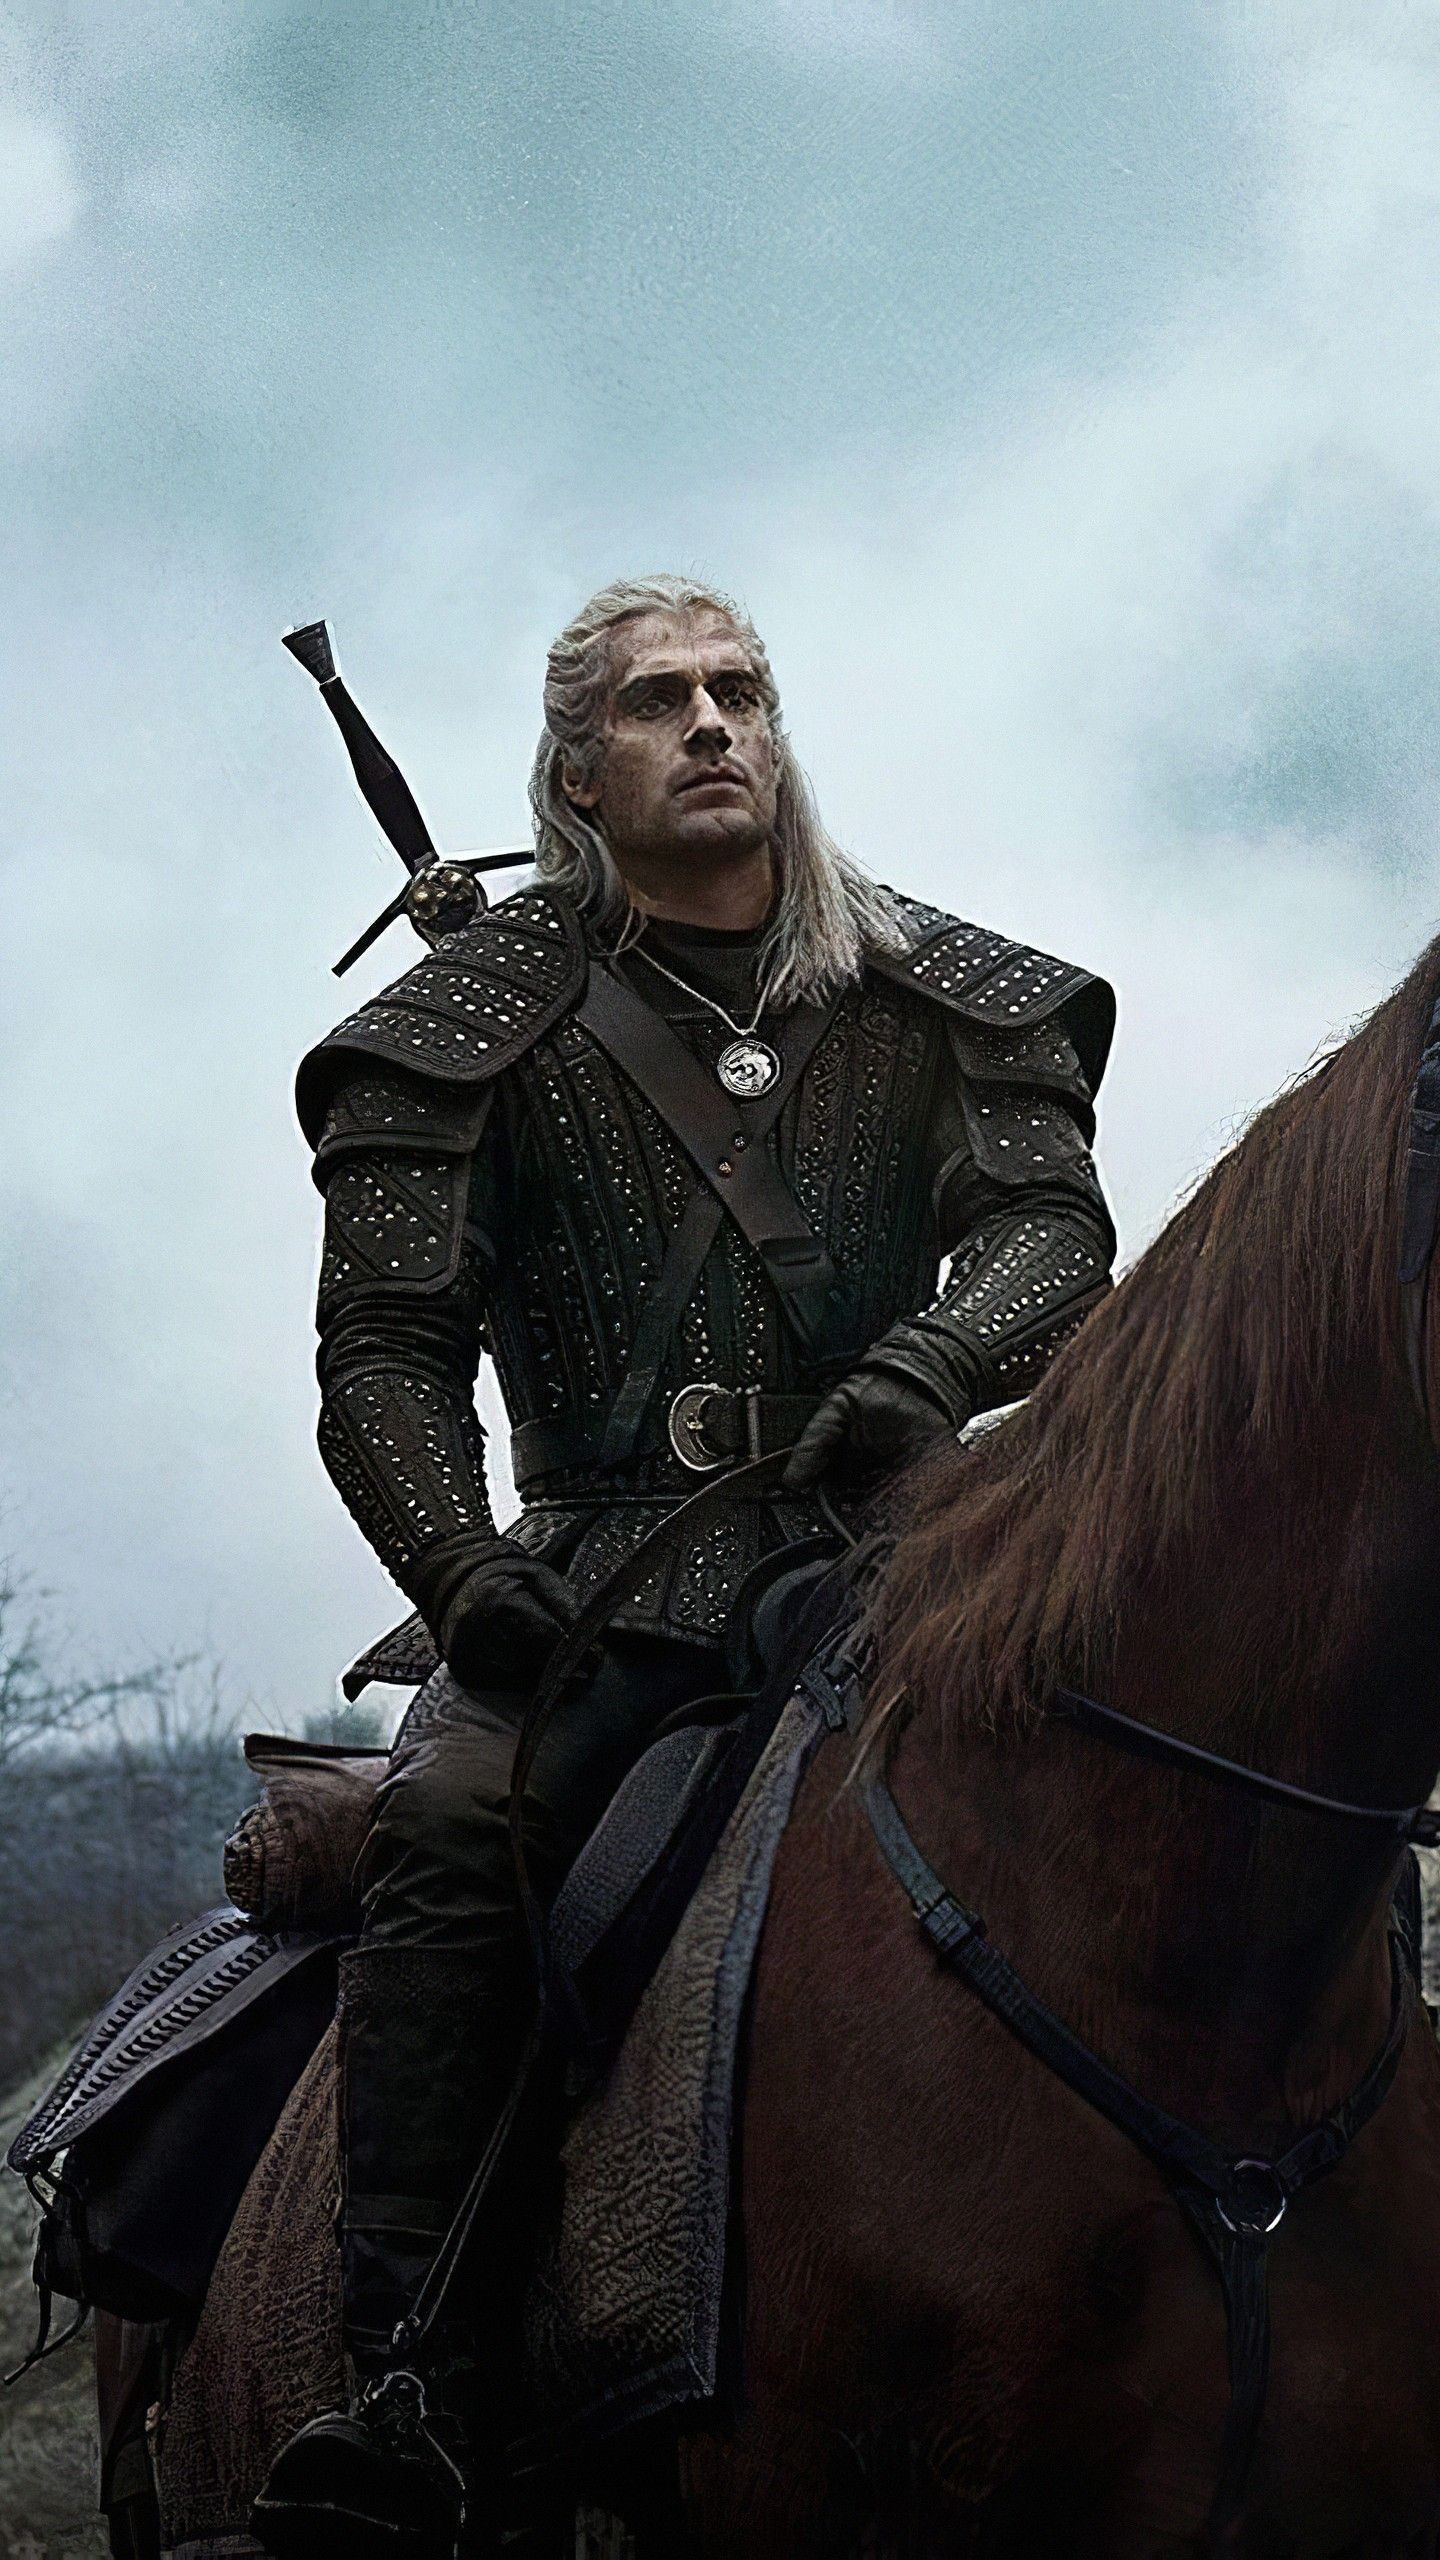 The Witcher Netflix TV Series: Release Date, Cast, Story